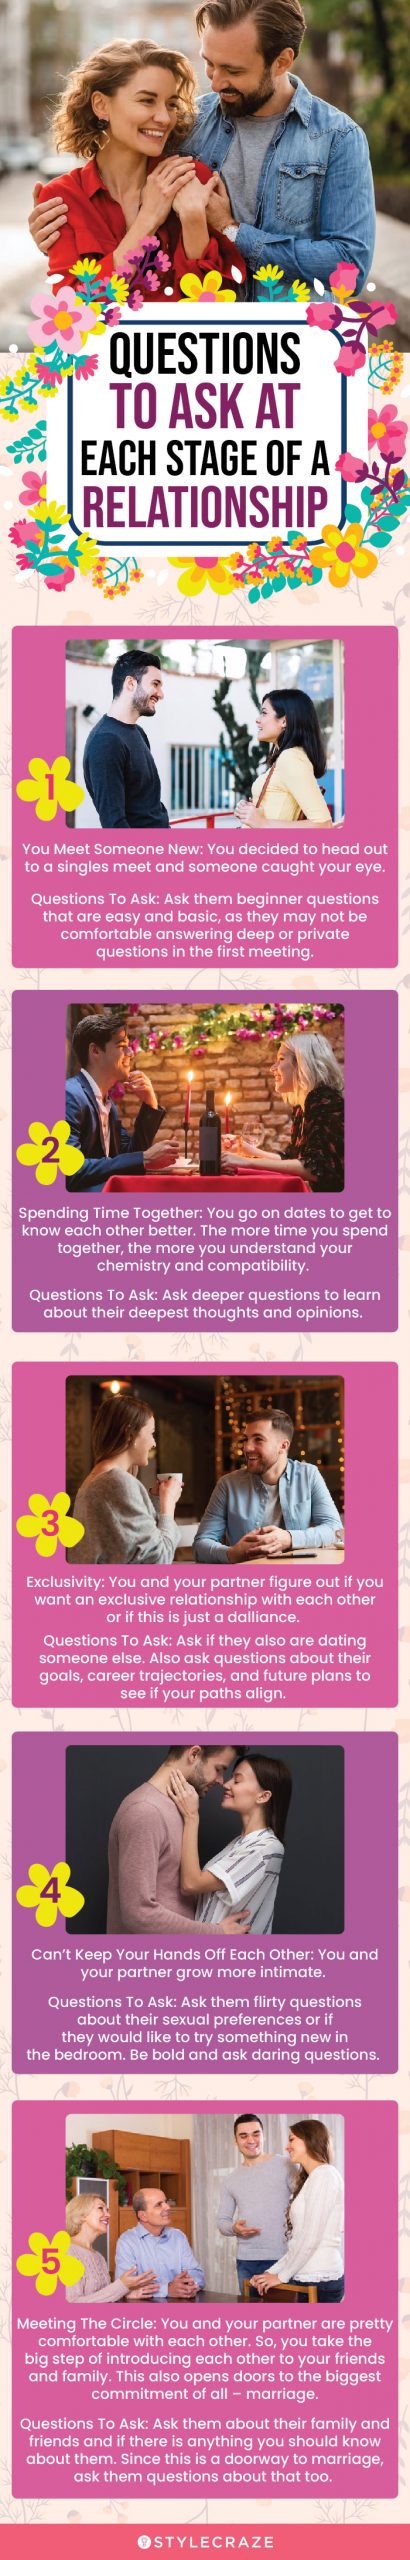 questions to ask at each stage of a relationship (infographic)